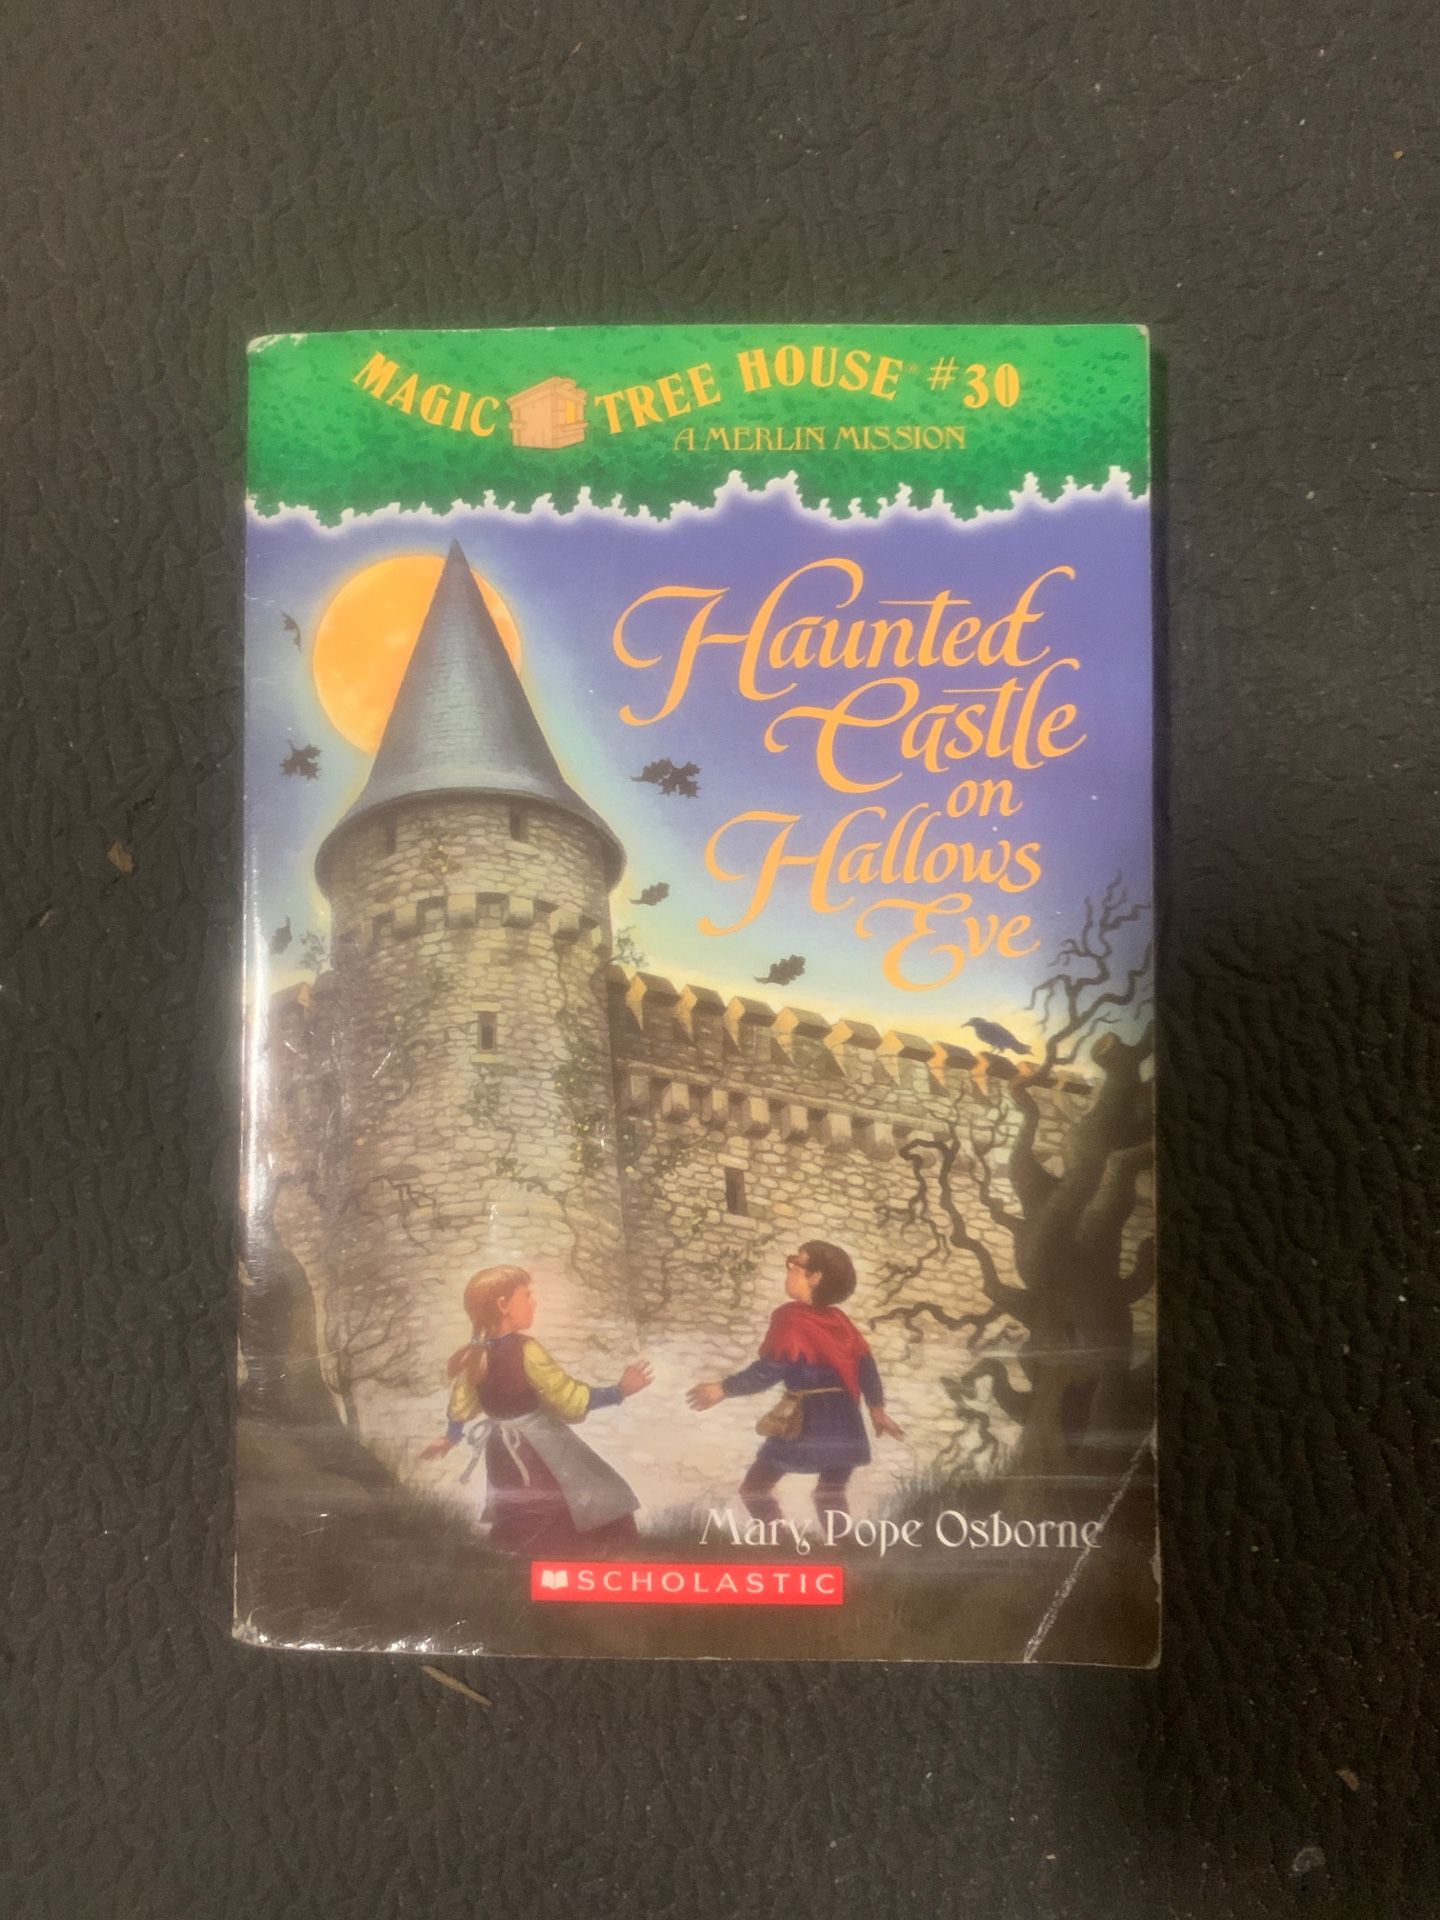 Magic tree house #30 haunted castle FREE with purchase